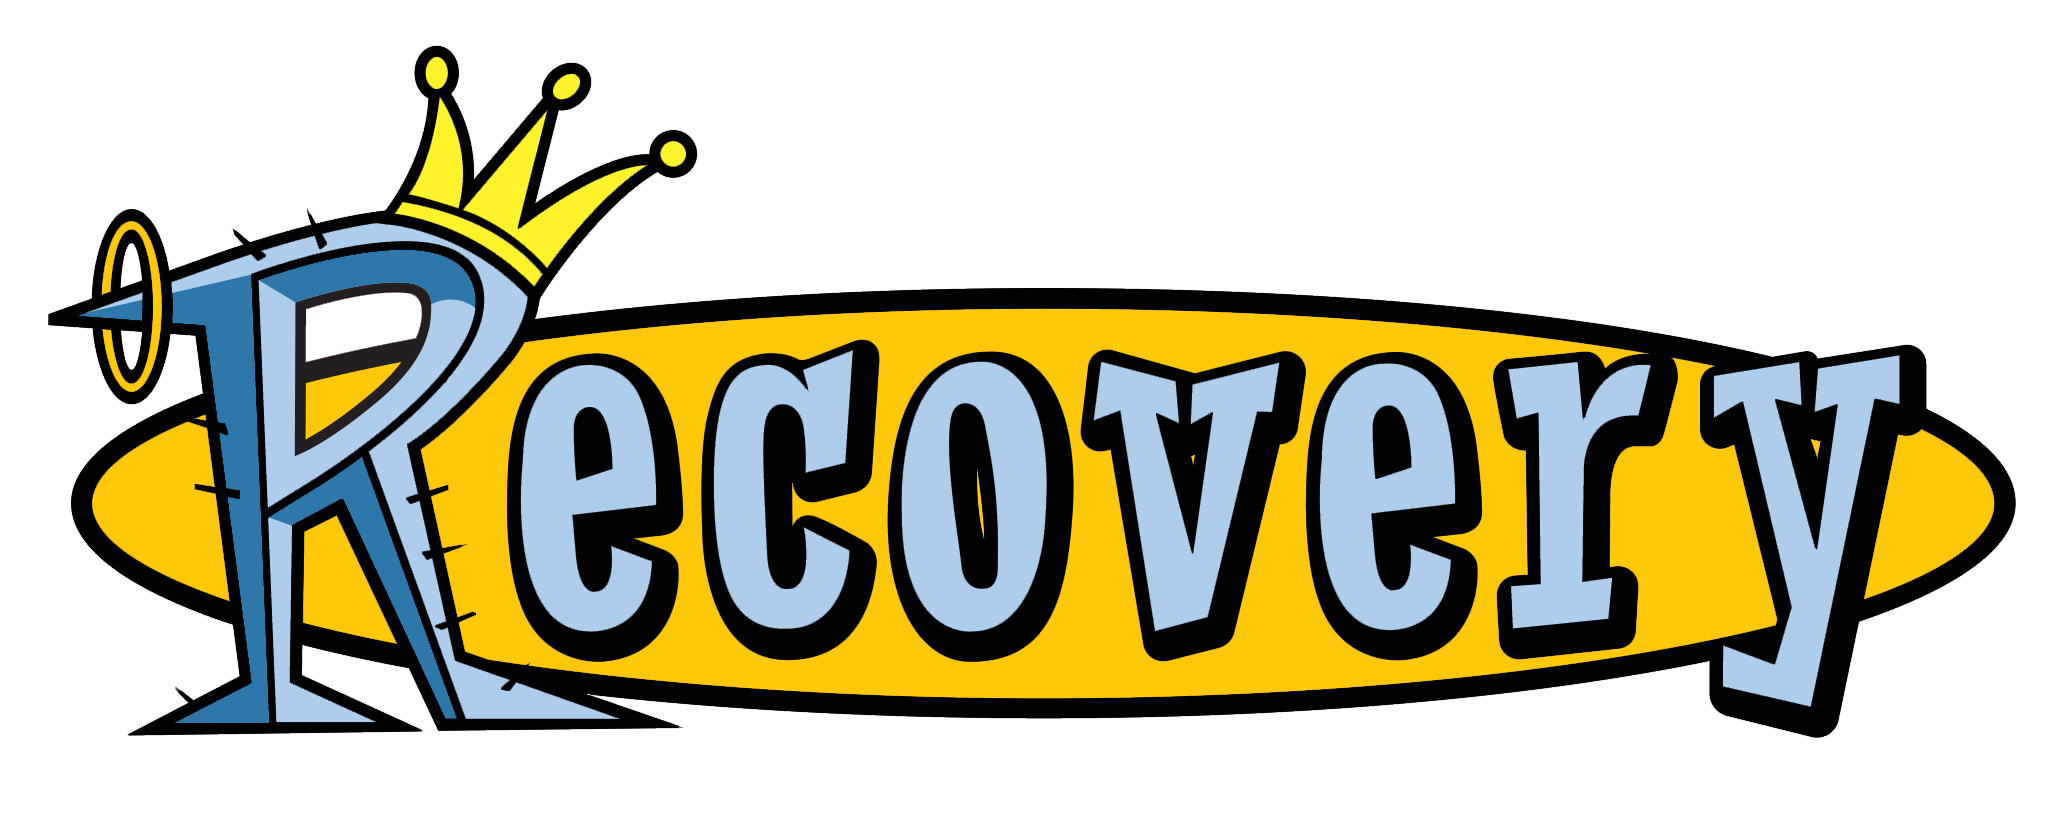 Hard Drive Recover: recover data from a formatted hard drive